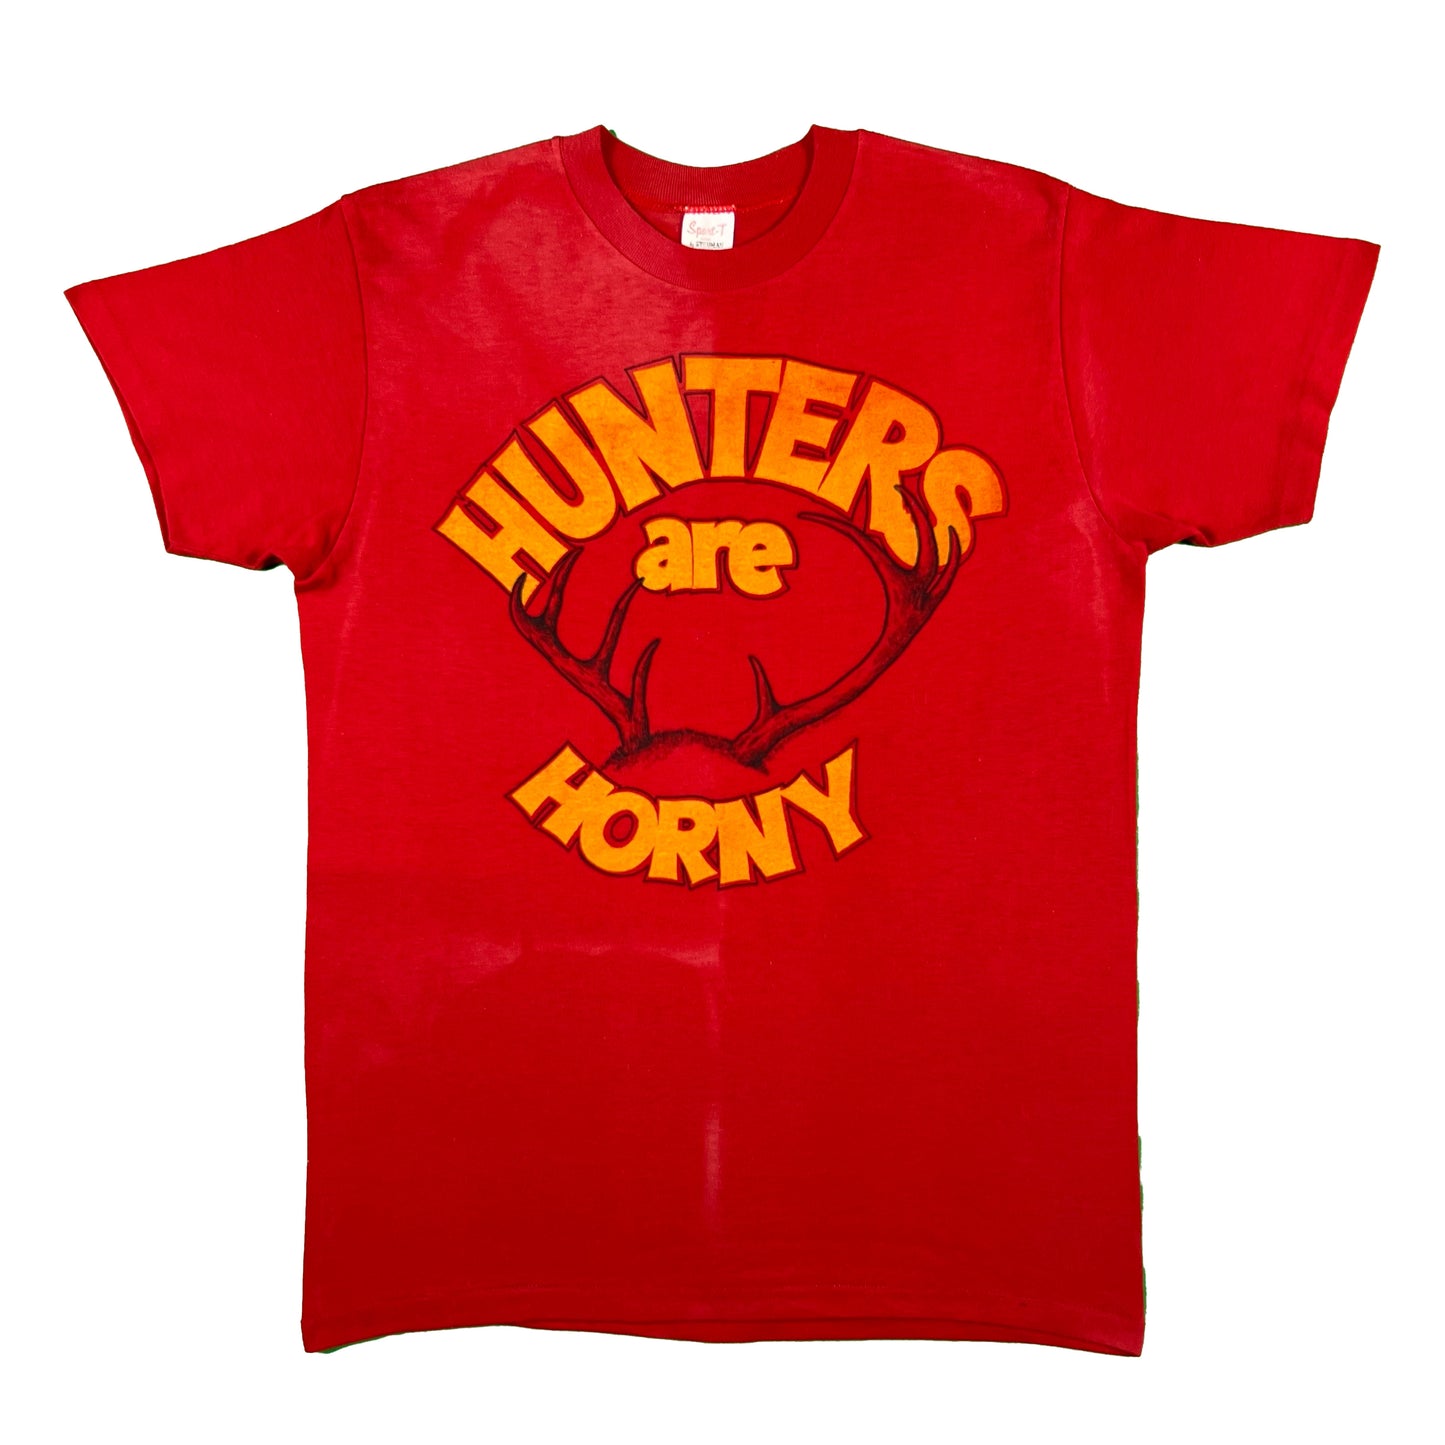 70s Hunters are Horny Tee- M